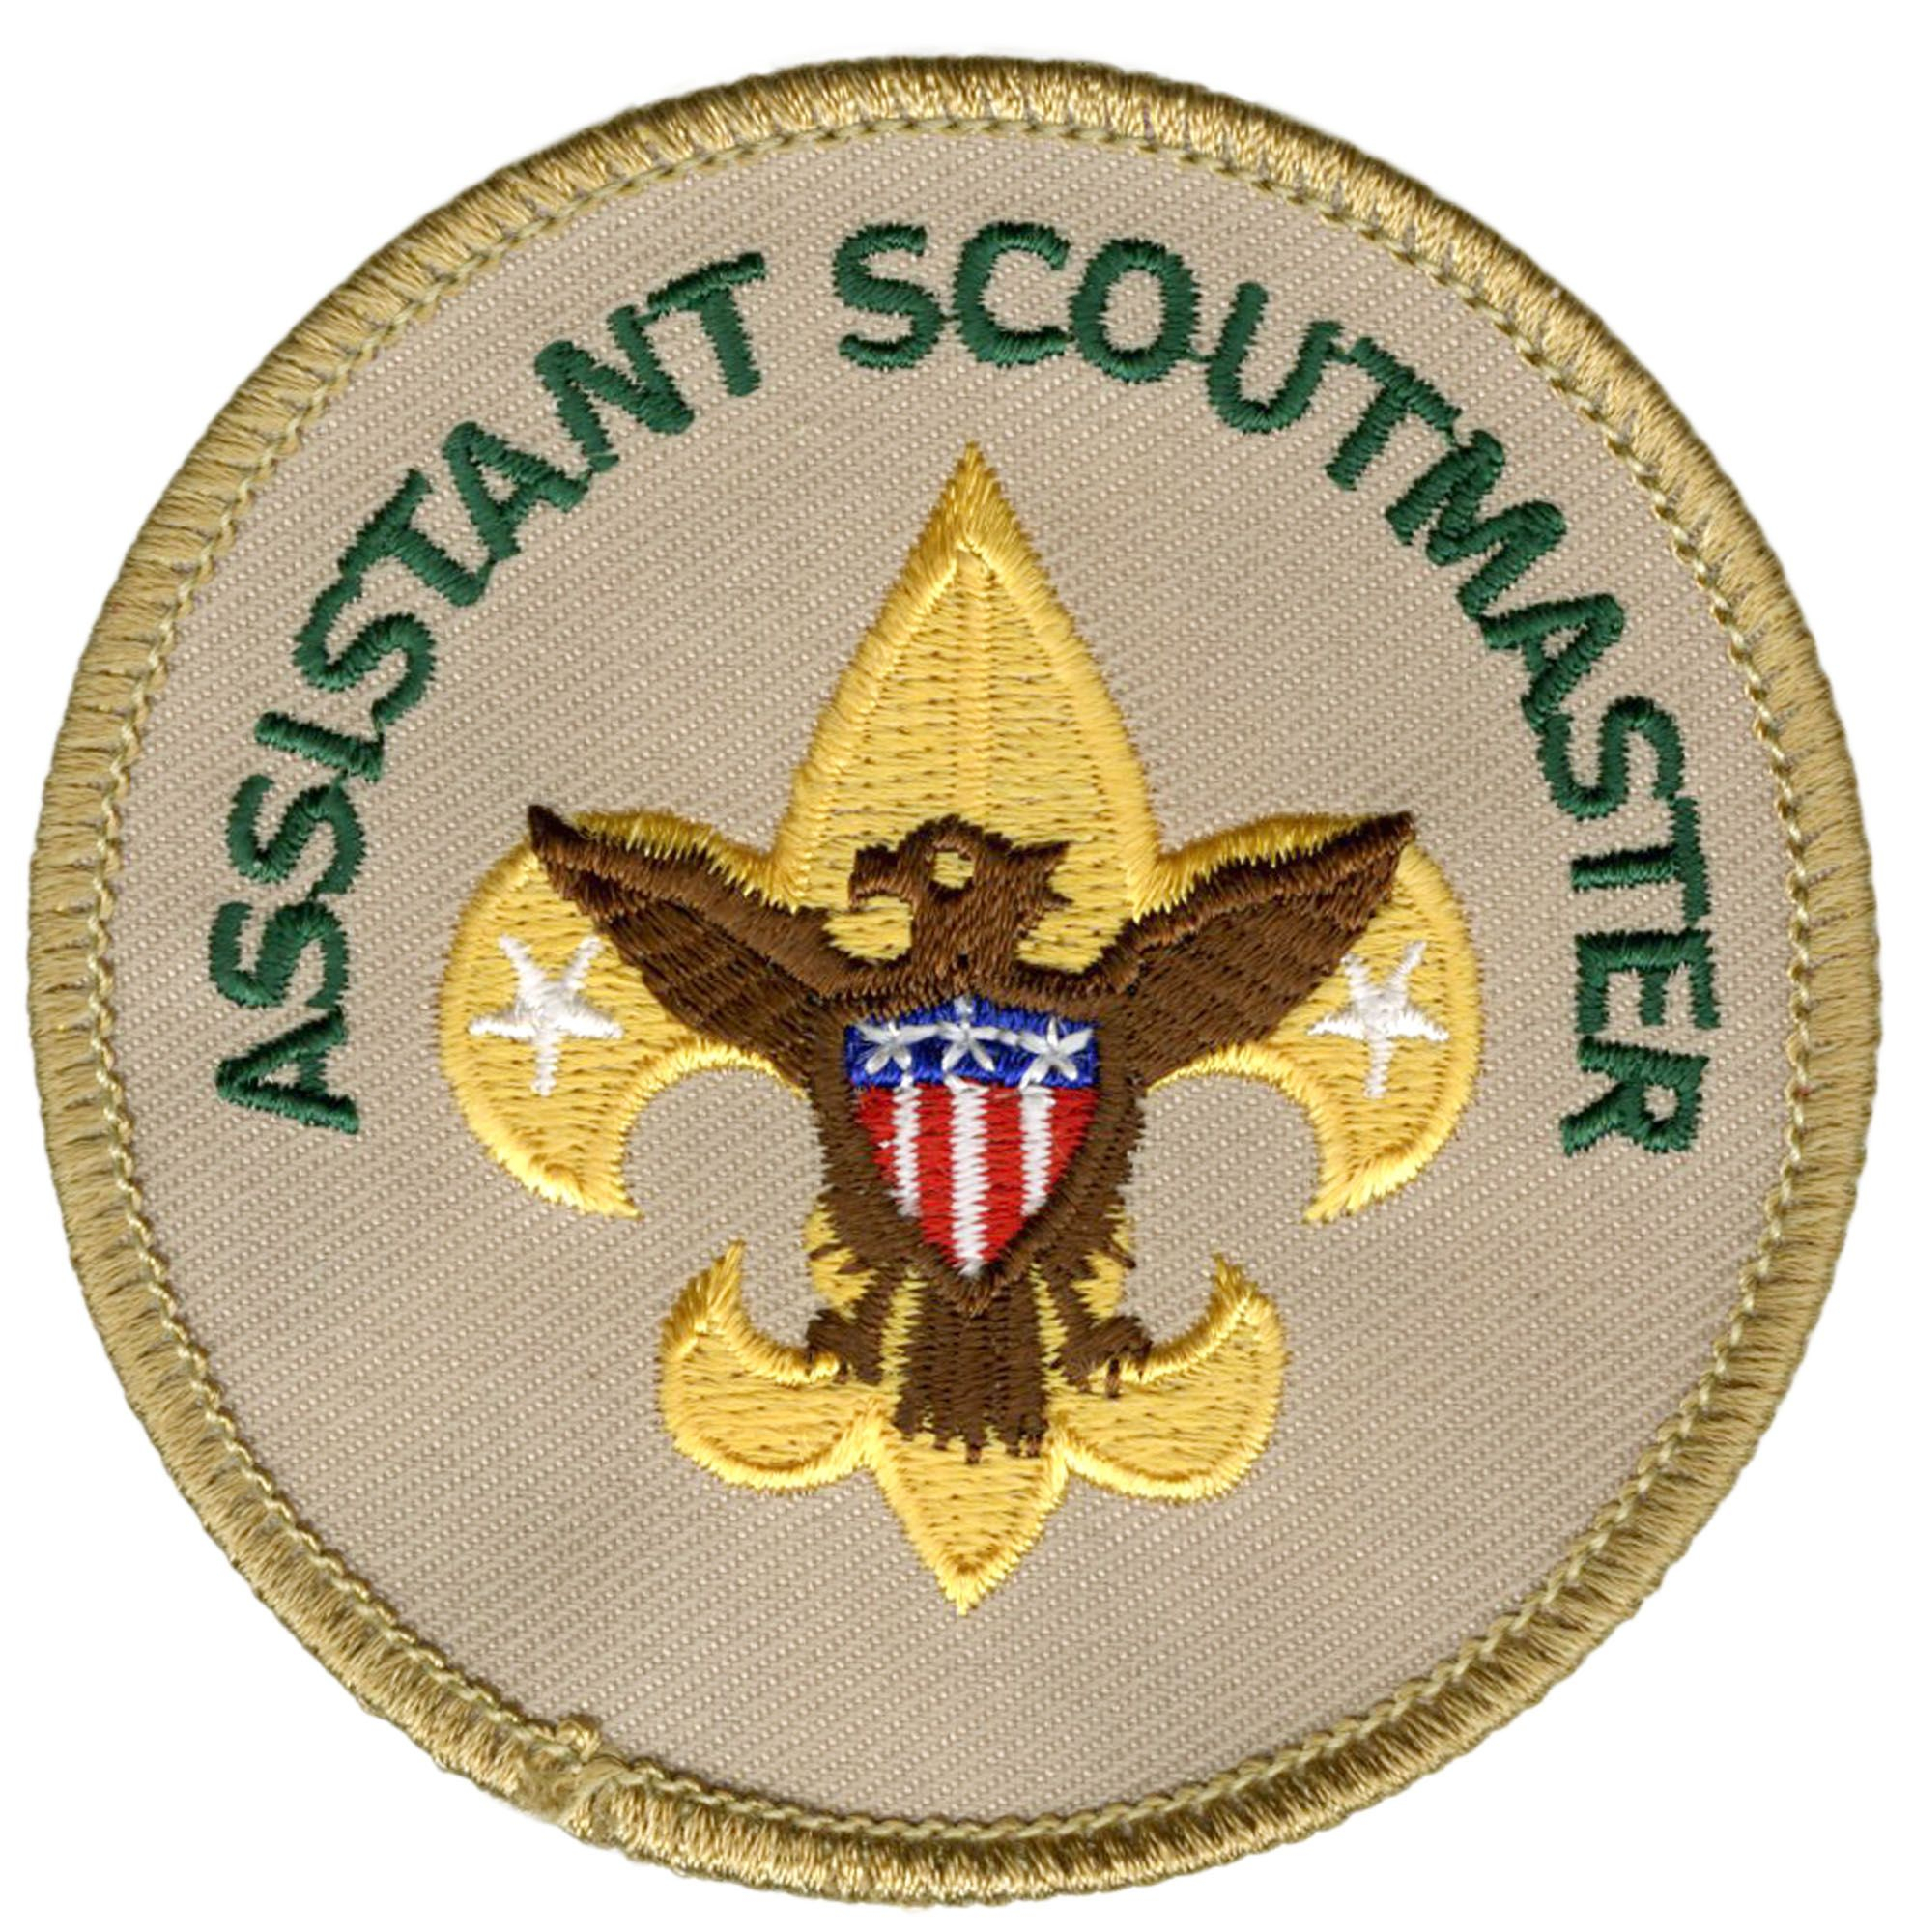 SCOUT STUFF BACKING BSA INSIGNIA…TROOP COMMITTEE BADGE…POST 2002 